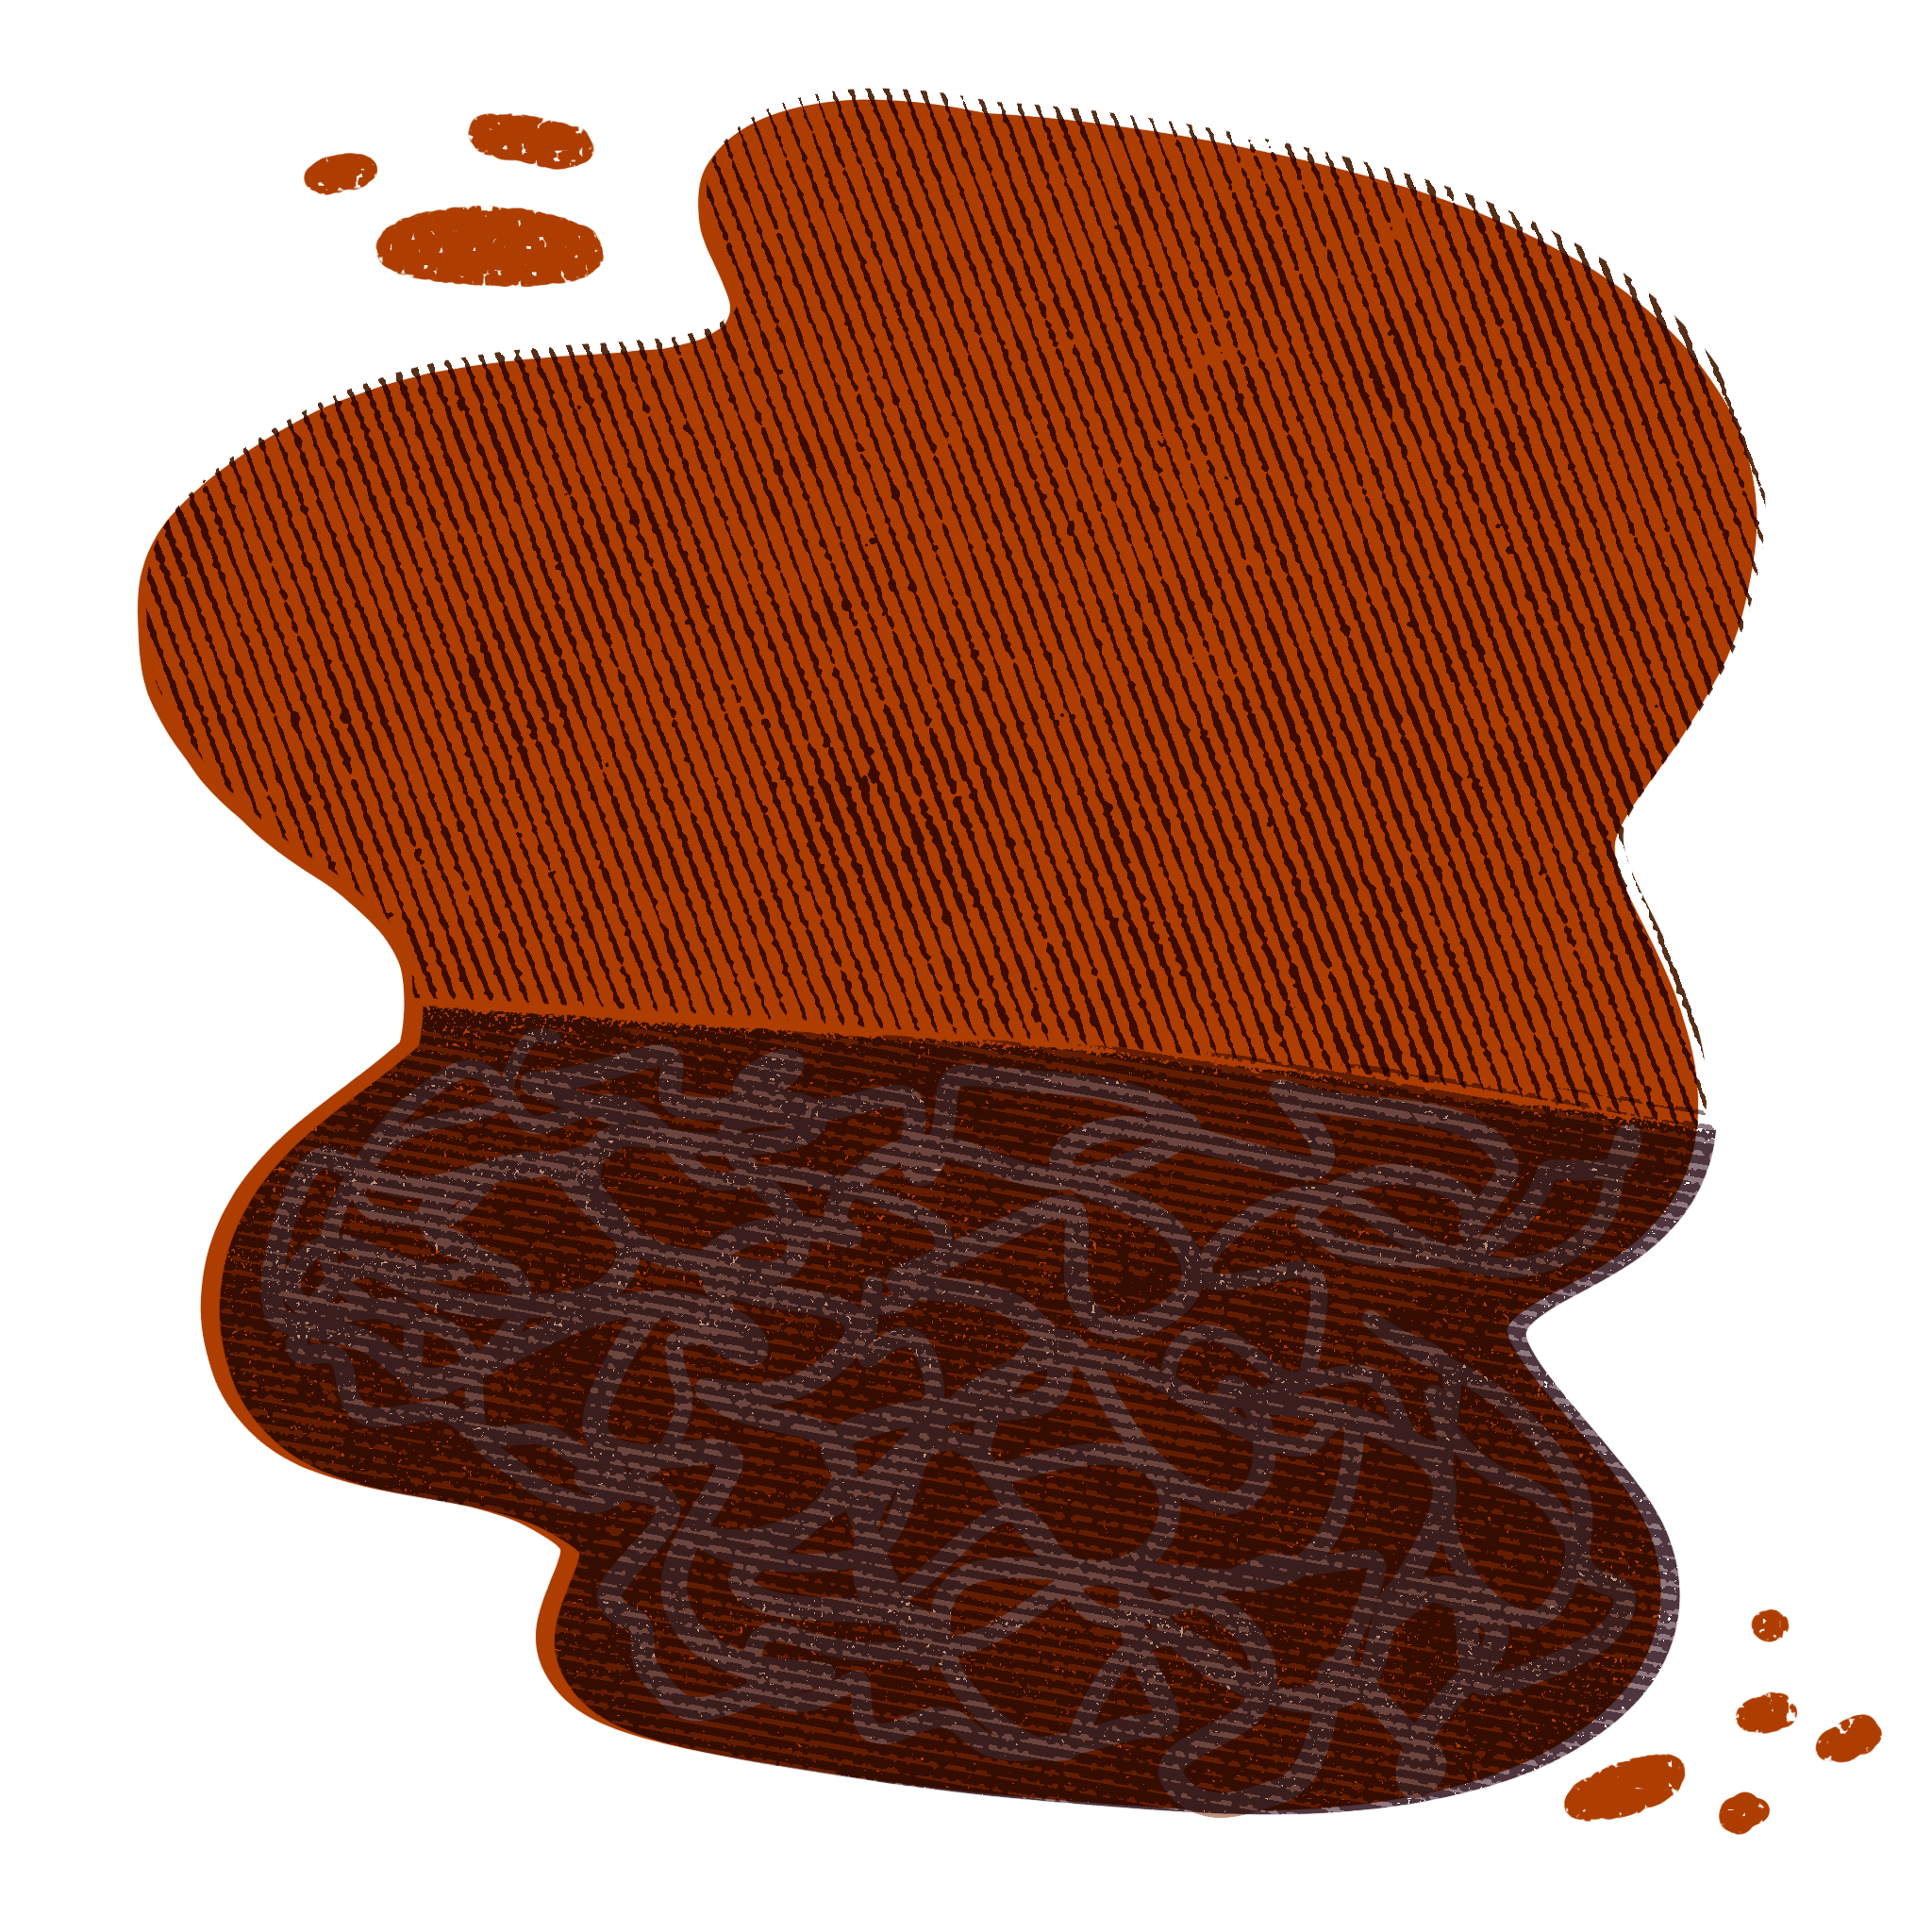 A curvy patch of mixed soil, half red-orange grit and half clumpy dark brown material.